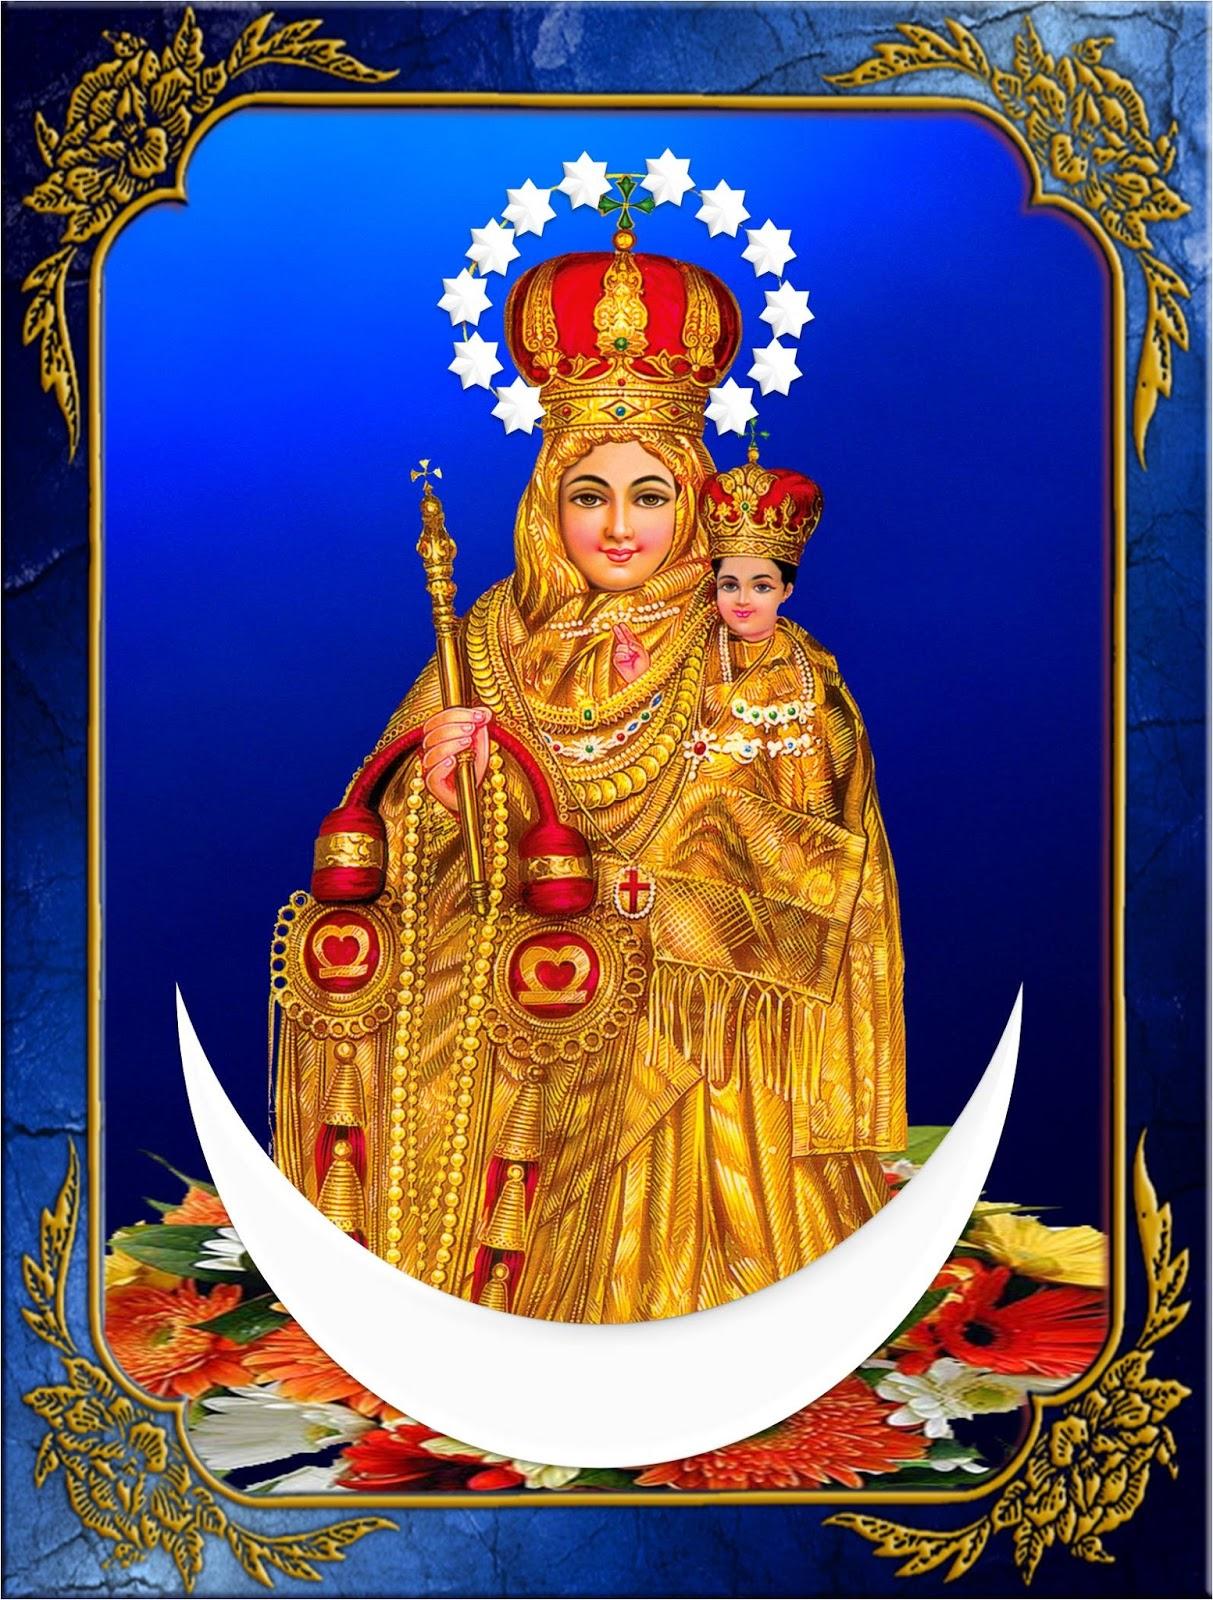 Our Lady of Good Health Vailankanni